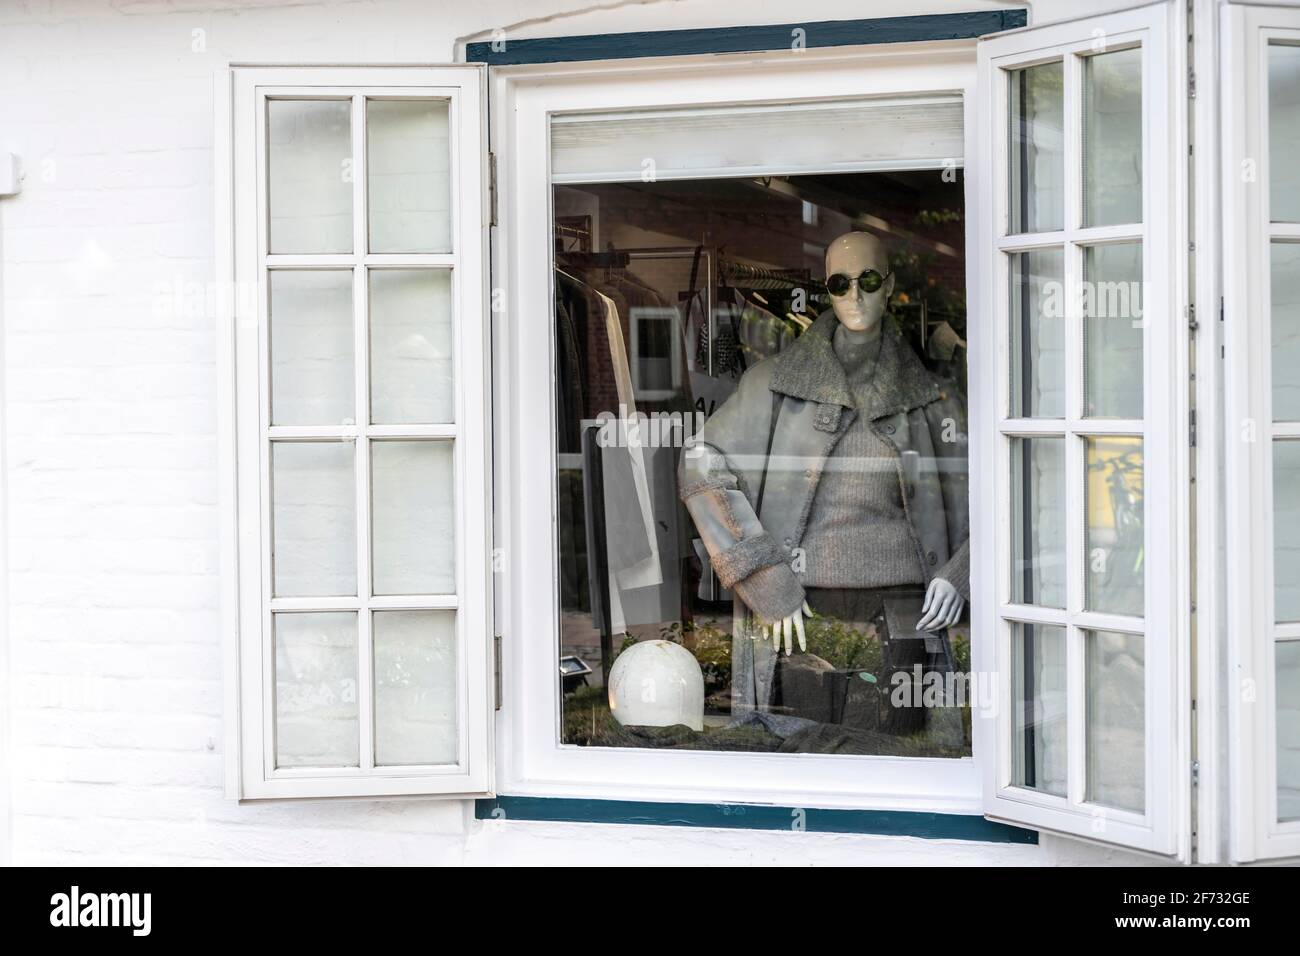 Shop window, mannequin with sunglasses, Keitum, Sylt, North Frisia, Schleswig-Holstein, Germany Stock Photo